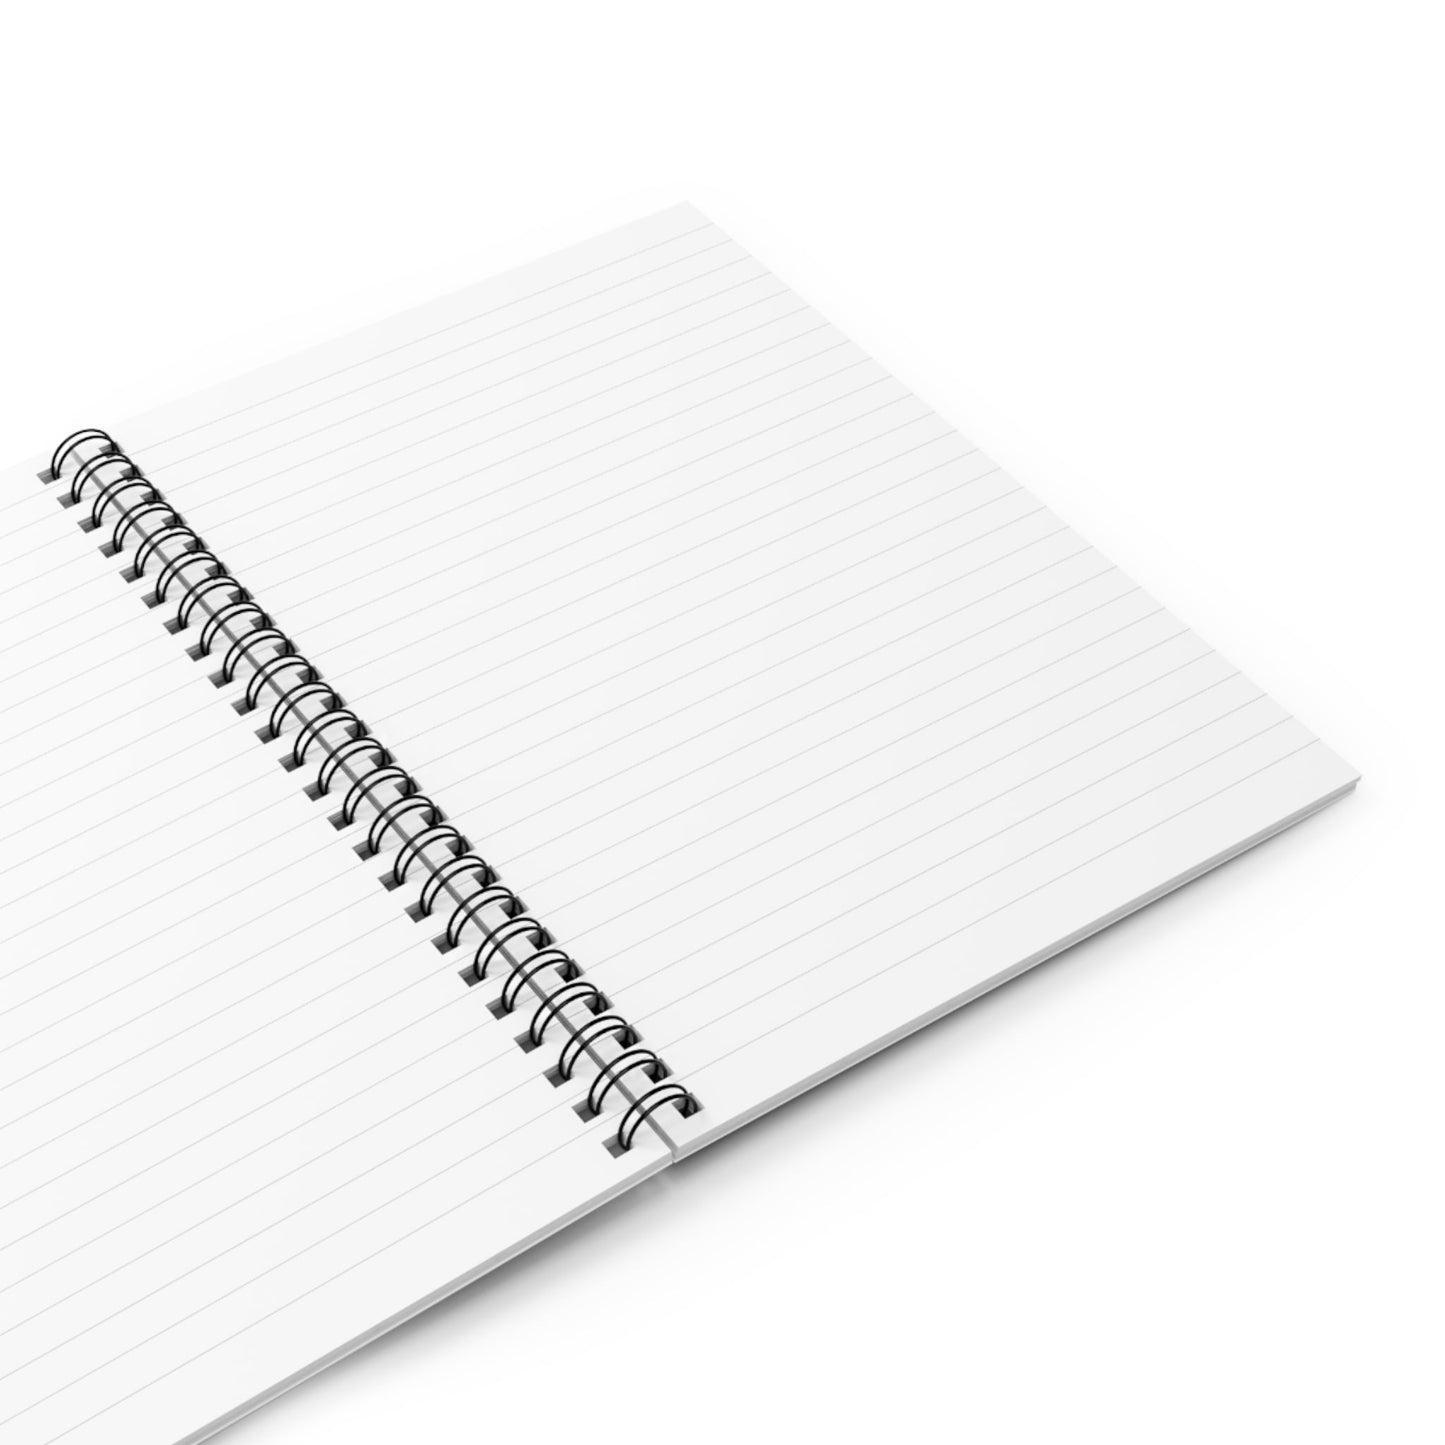 Spiral Notebook with Rolling Hills Cover Opened with Blank White College Ruled Pages